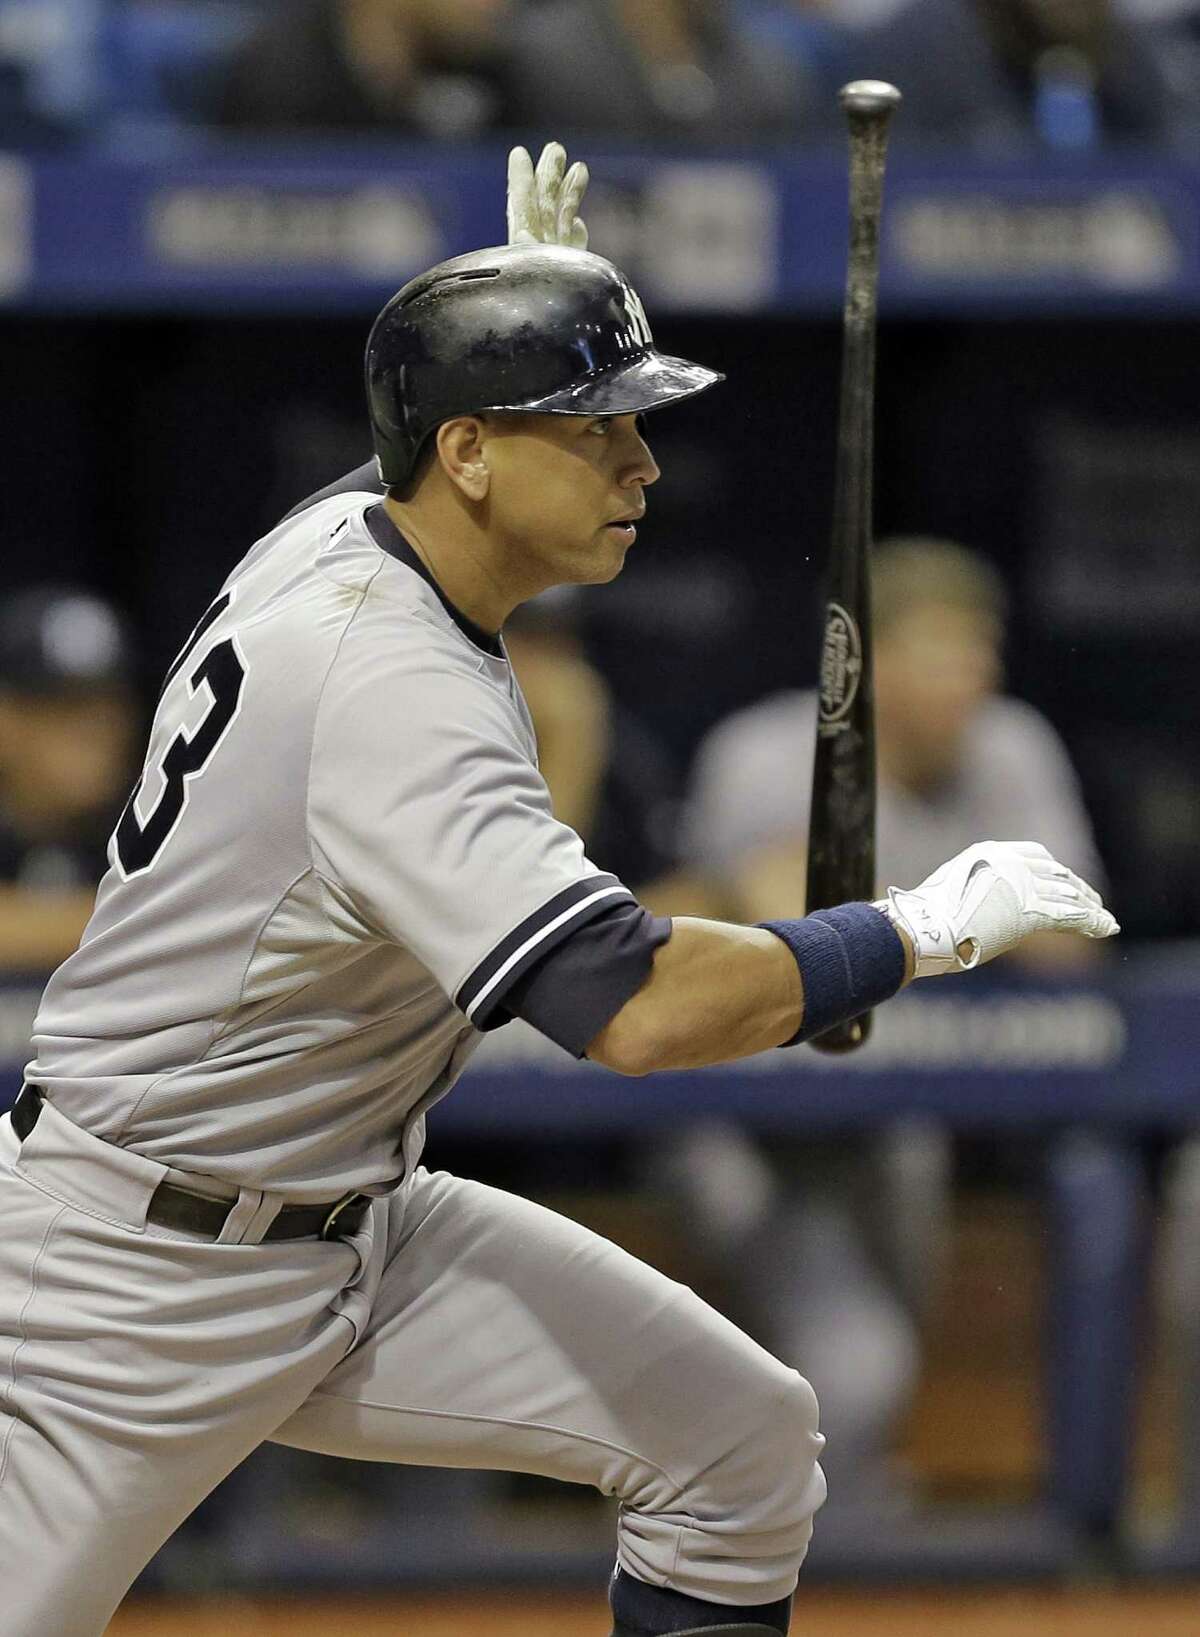 New York Yankees' Alex Rodriguez flips his bat after hitting an RBI double off Tampa Bay Rays relief pitcher Brad Boxberger during the ninth inning of a baseball game Monday, Sept. 14, 2015, in St. Petersburg, Fla. Yankees' Brett Gardner scored on the hit. The Yankees defeated the Rays 4-1. (AP Photo/Chris O'Meara) ORG XMIT: SPD122